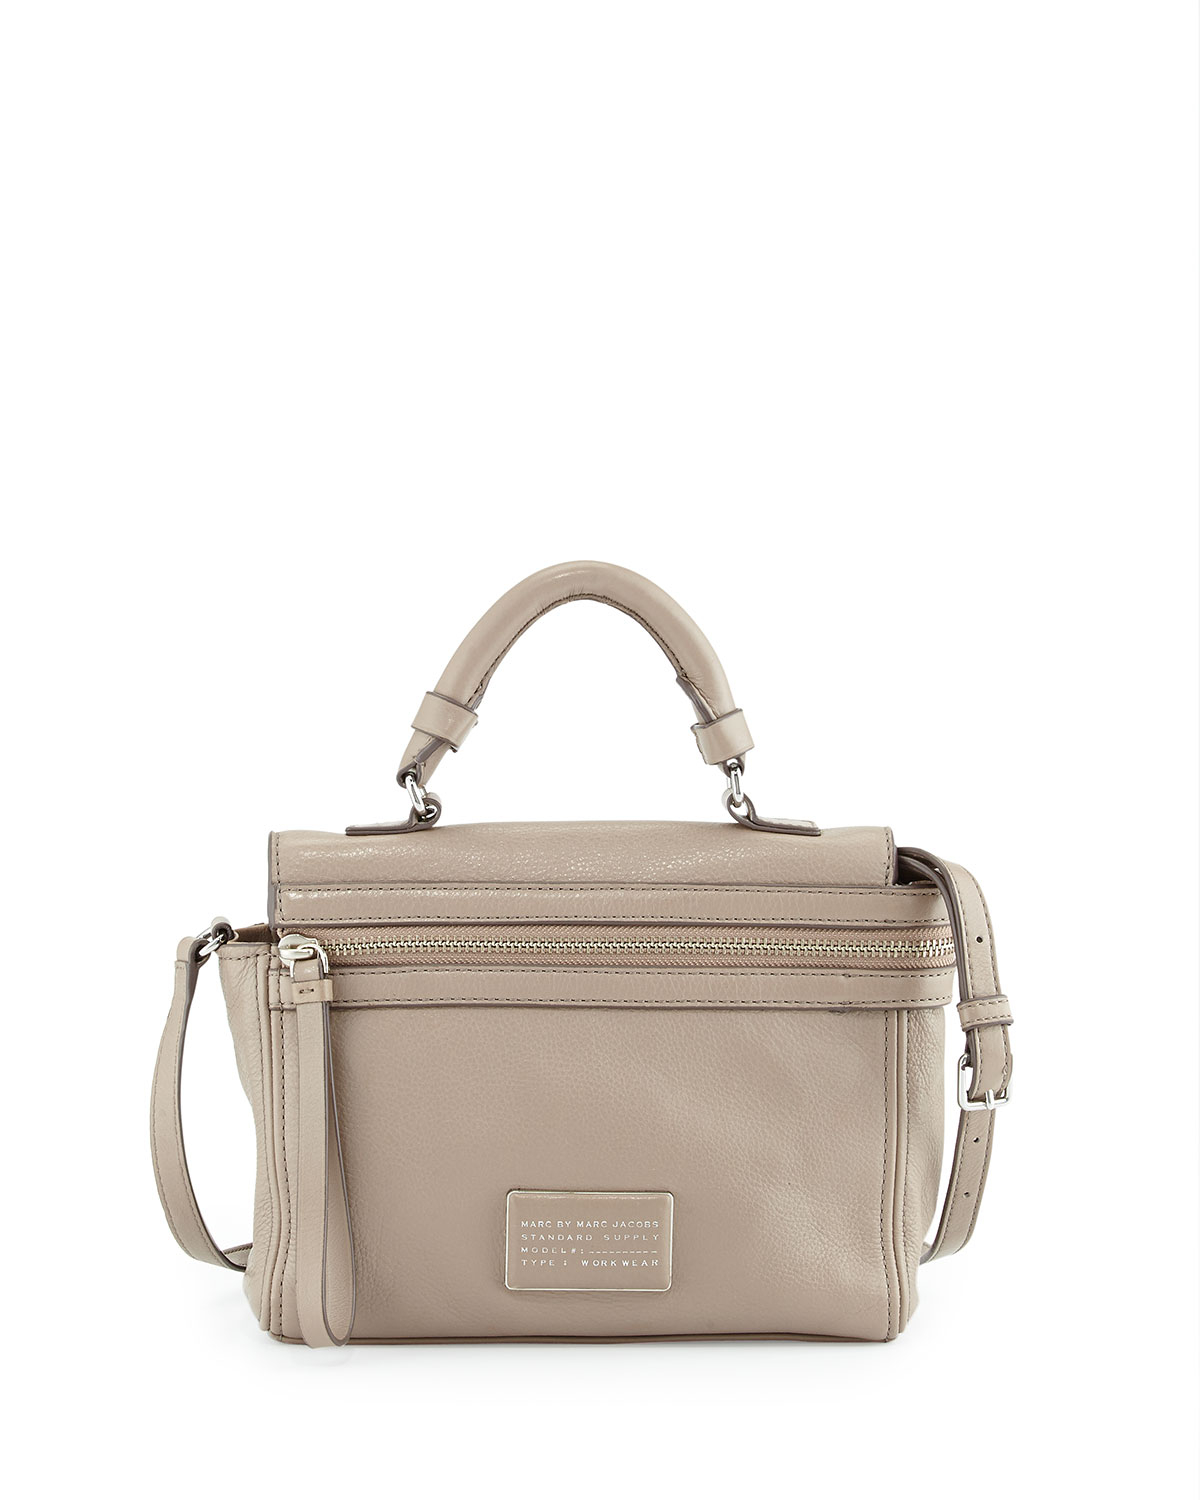 Marc by marc jacobs Third Rail Leather Crossbody Bag in Gray (CEMENT) | Lyst